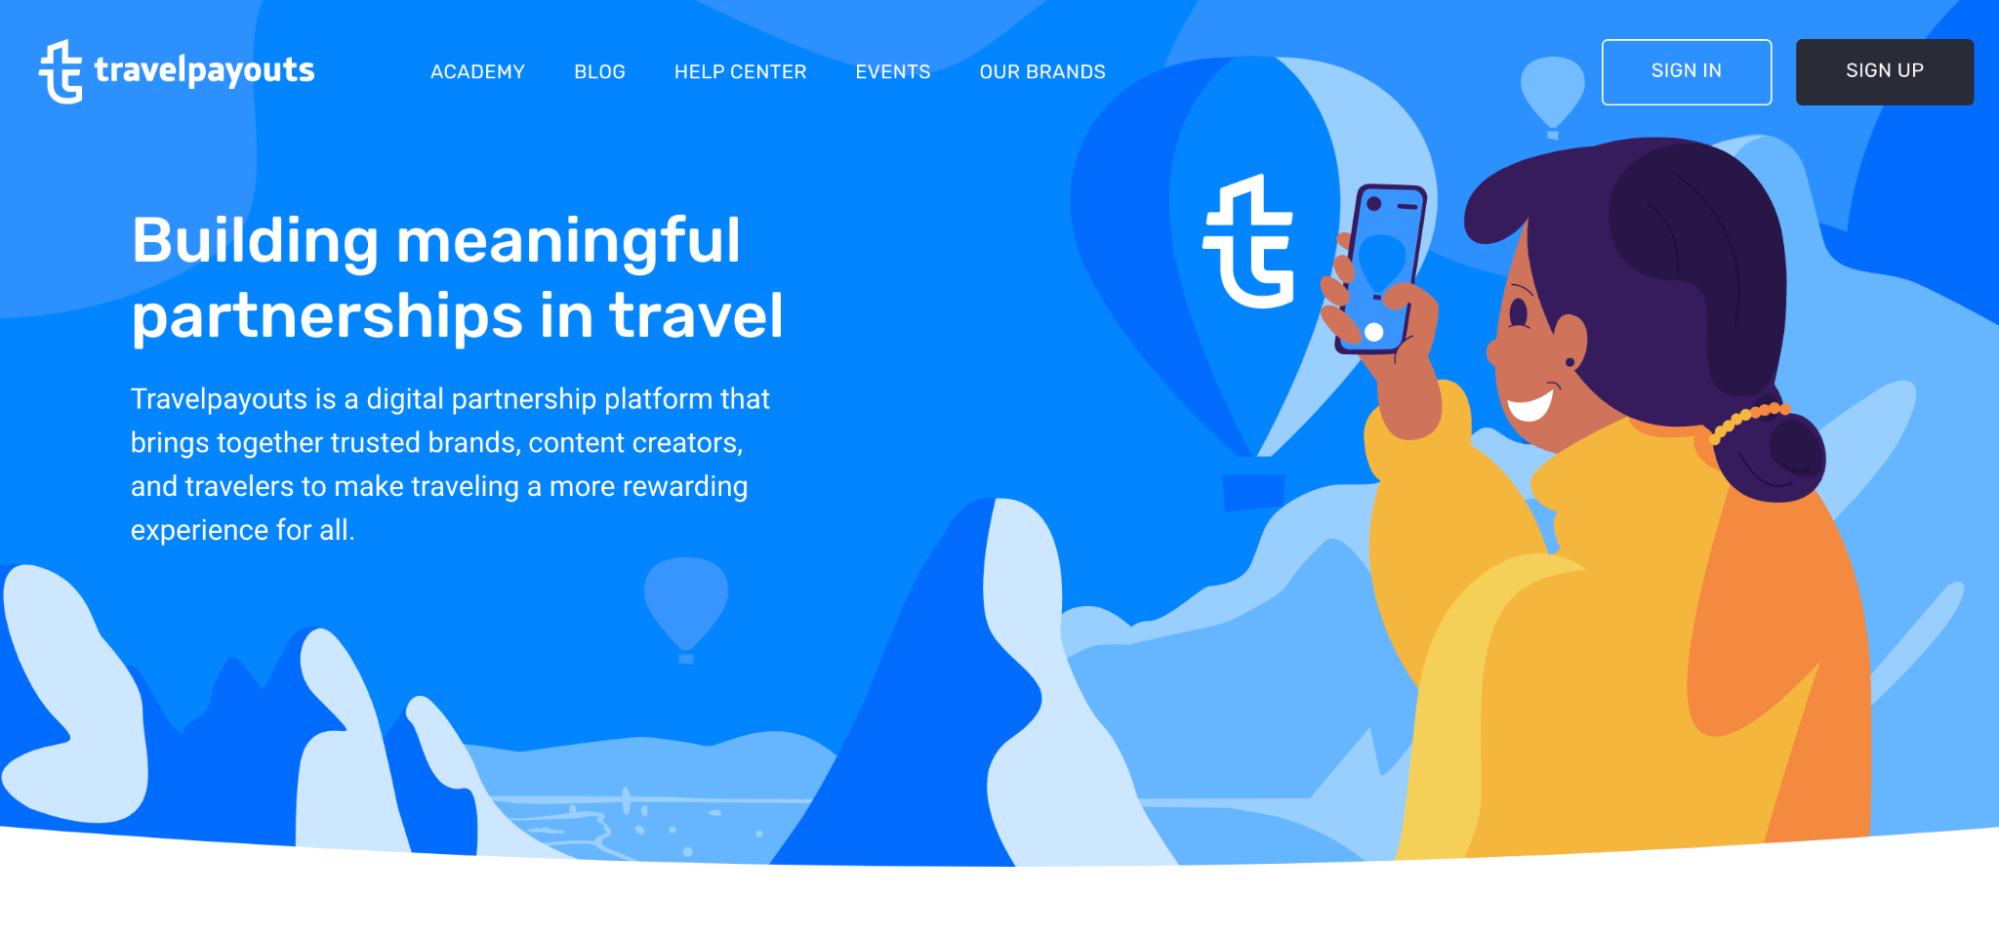 The image displays the Travelpayouts “About” page with a graphic of a woman on a phone plus text describing what Travelpayouts does and how they bring together trusted brands, content creators, and travelers.
